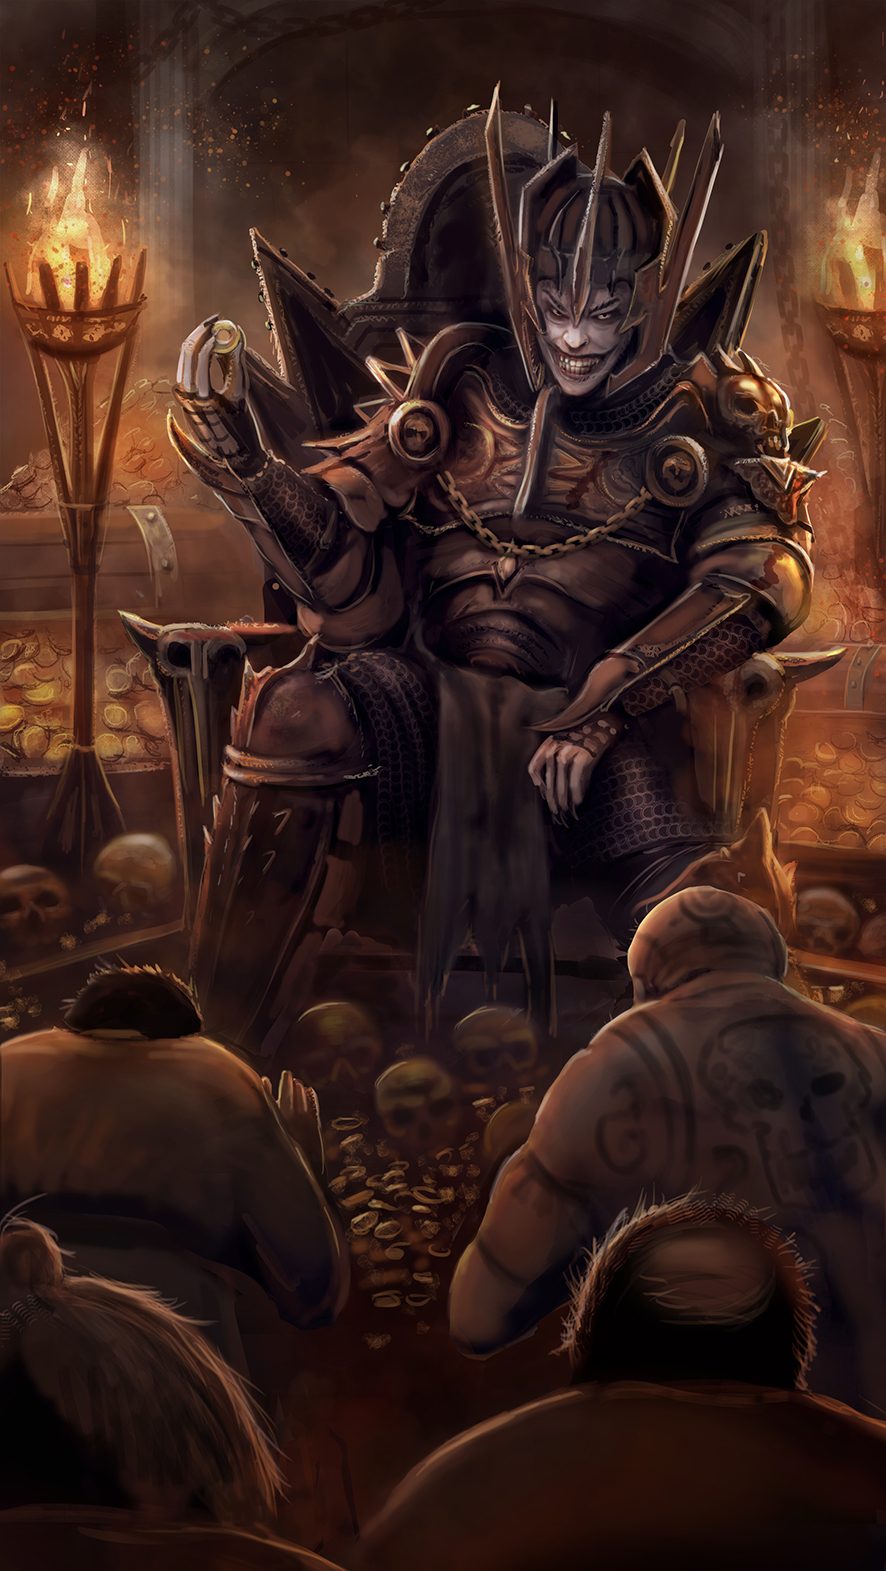 Scary tyrant fantasy artwork. Demon lord. Demon duke, Demon king. With bowing minions in a throne room. Fantasy horror art.